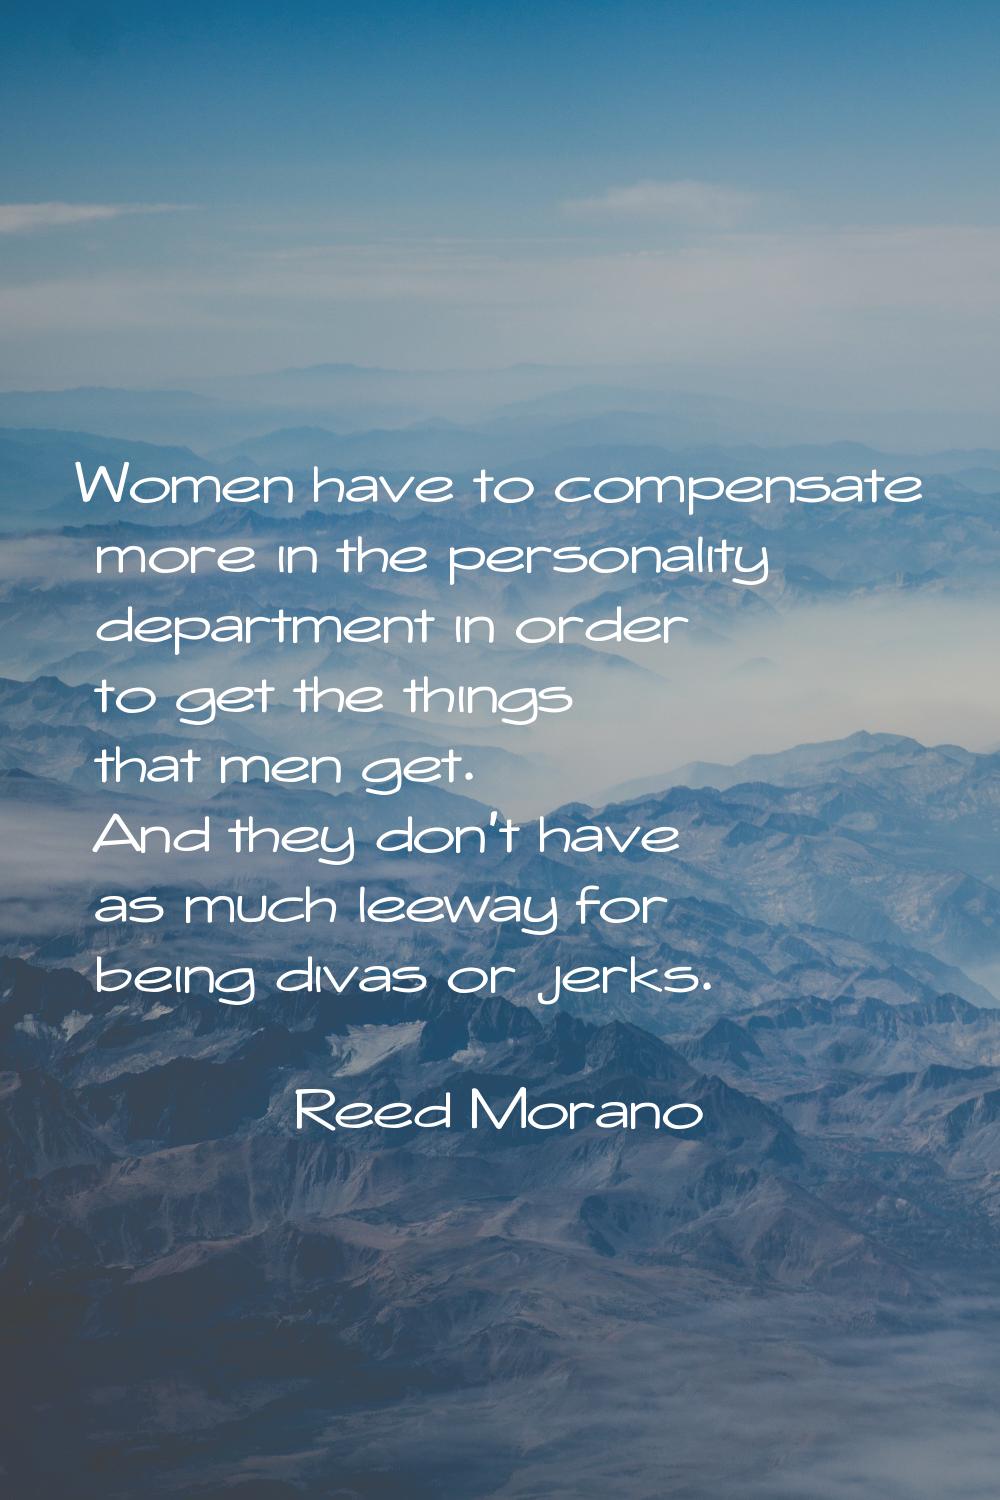 Women have to compensate more in the personality department in order to get the things that men get